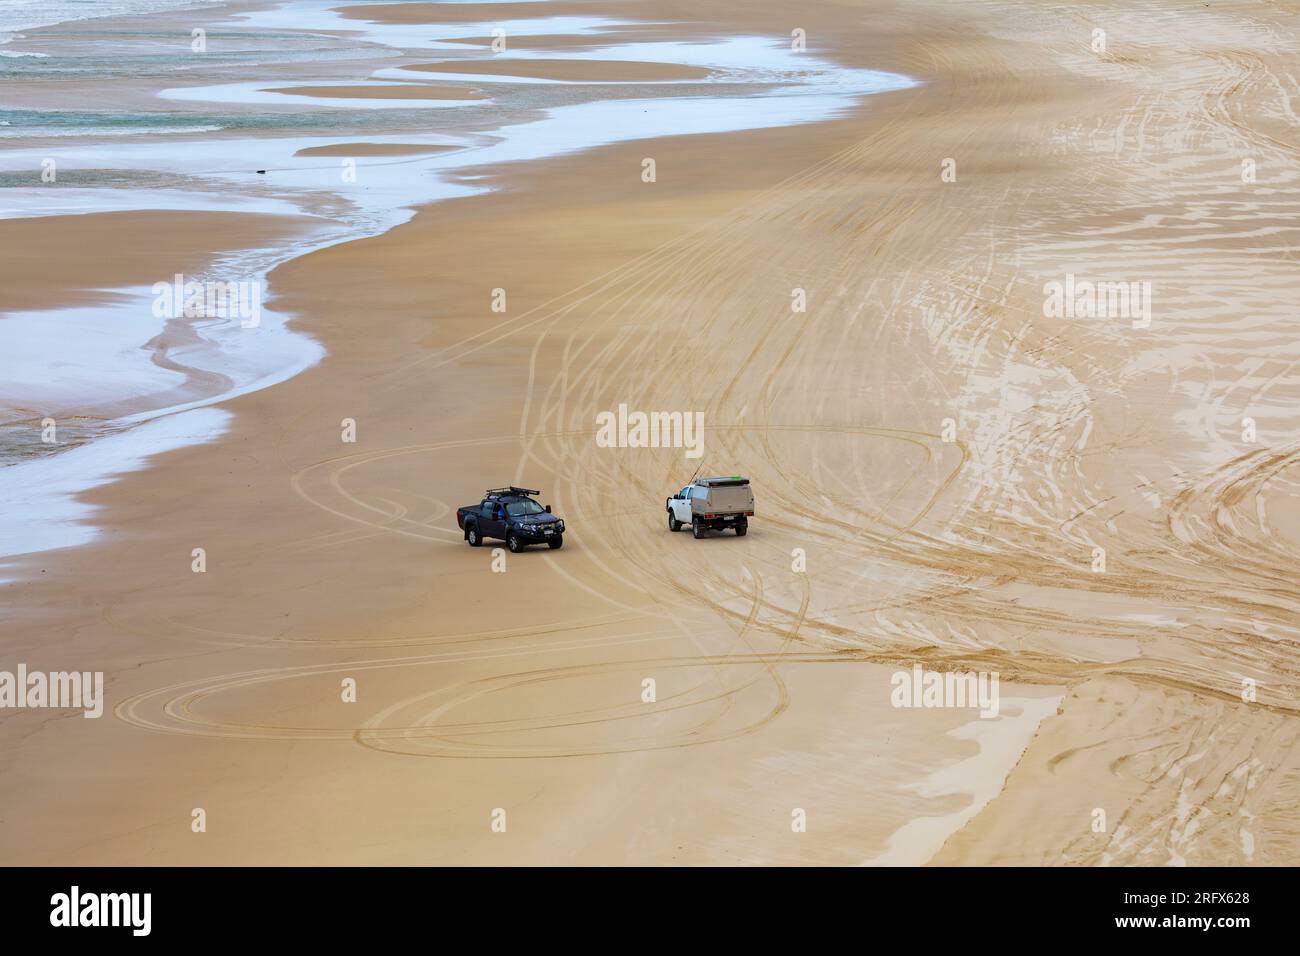 Beach sand driving on Fraser Island k'agri , 4x4 vehicles drive on 75 mile beach's legal highway road,Queensland,Australia Stock Photo